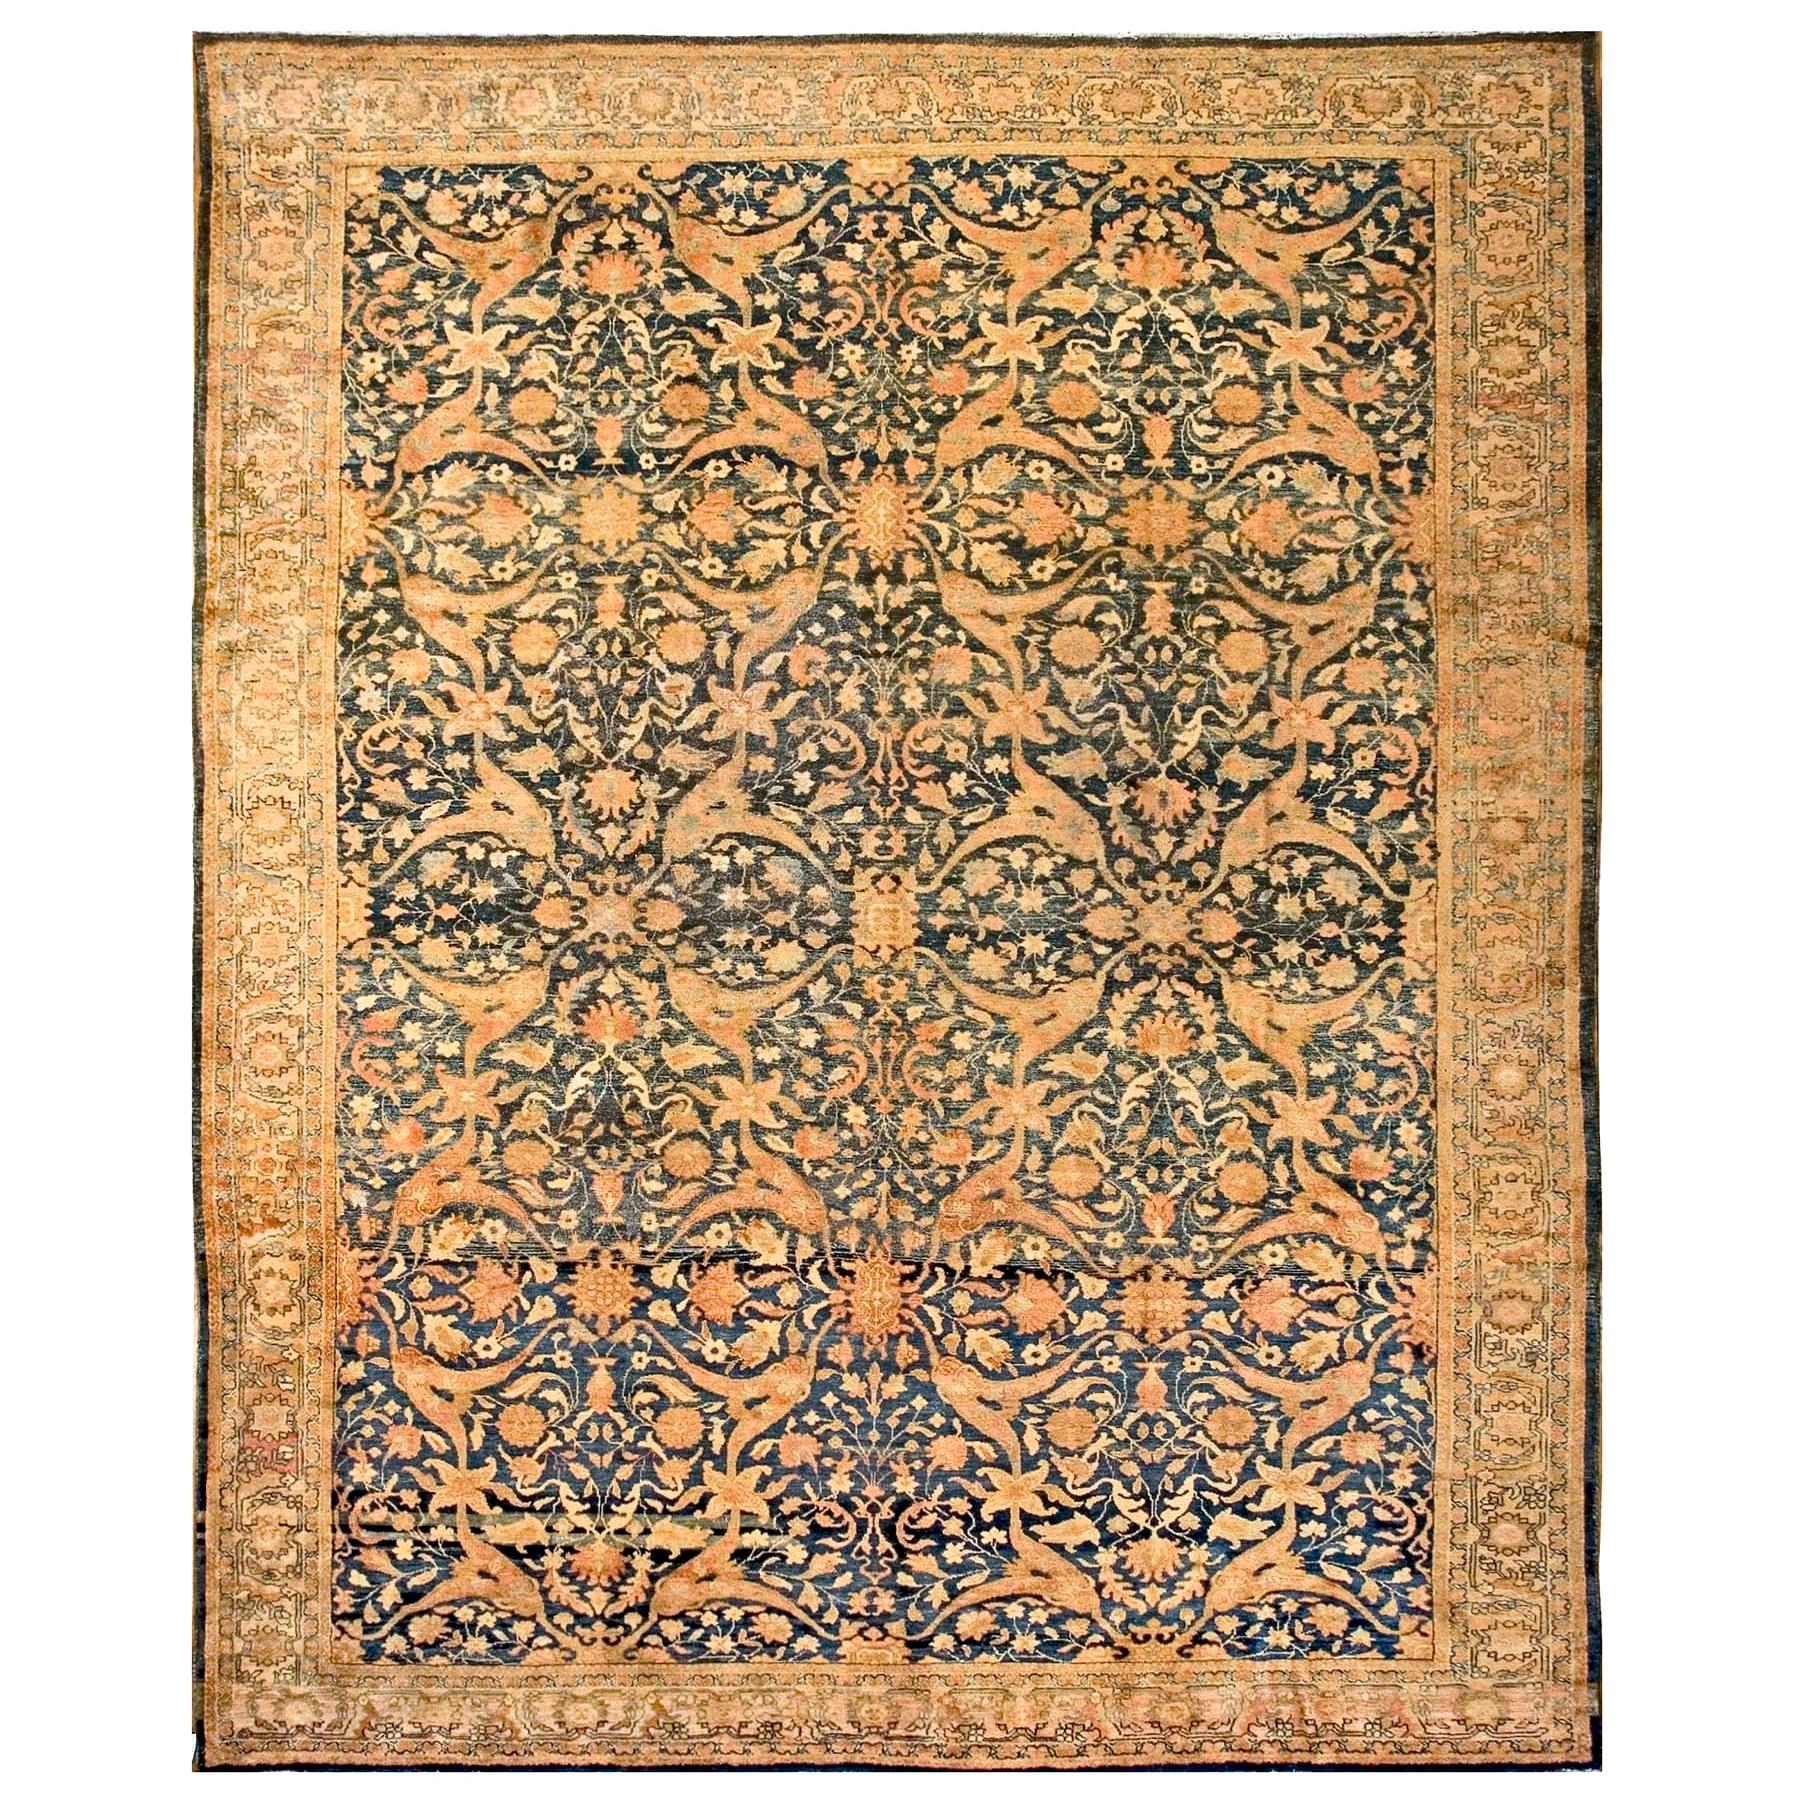 Early 20th Century Persian Malayer Carpet ( 9'6" X 11'9" - 290 x 358 ) For Sale